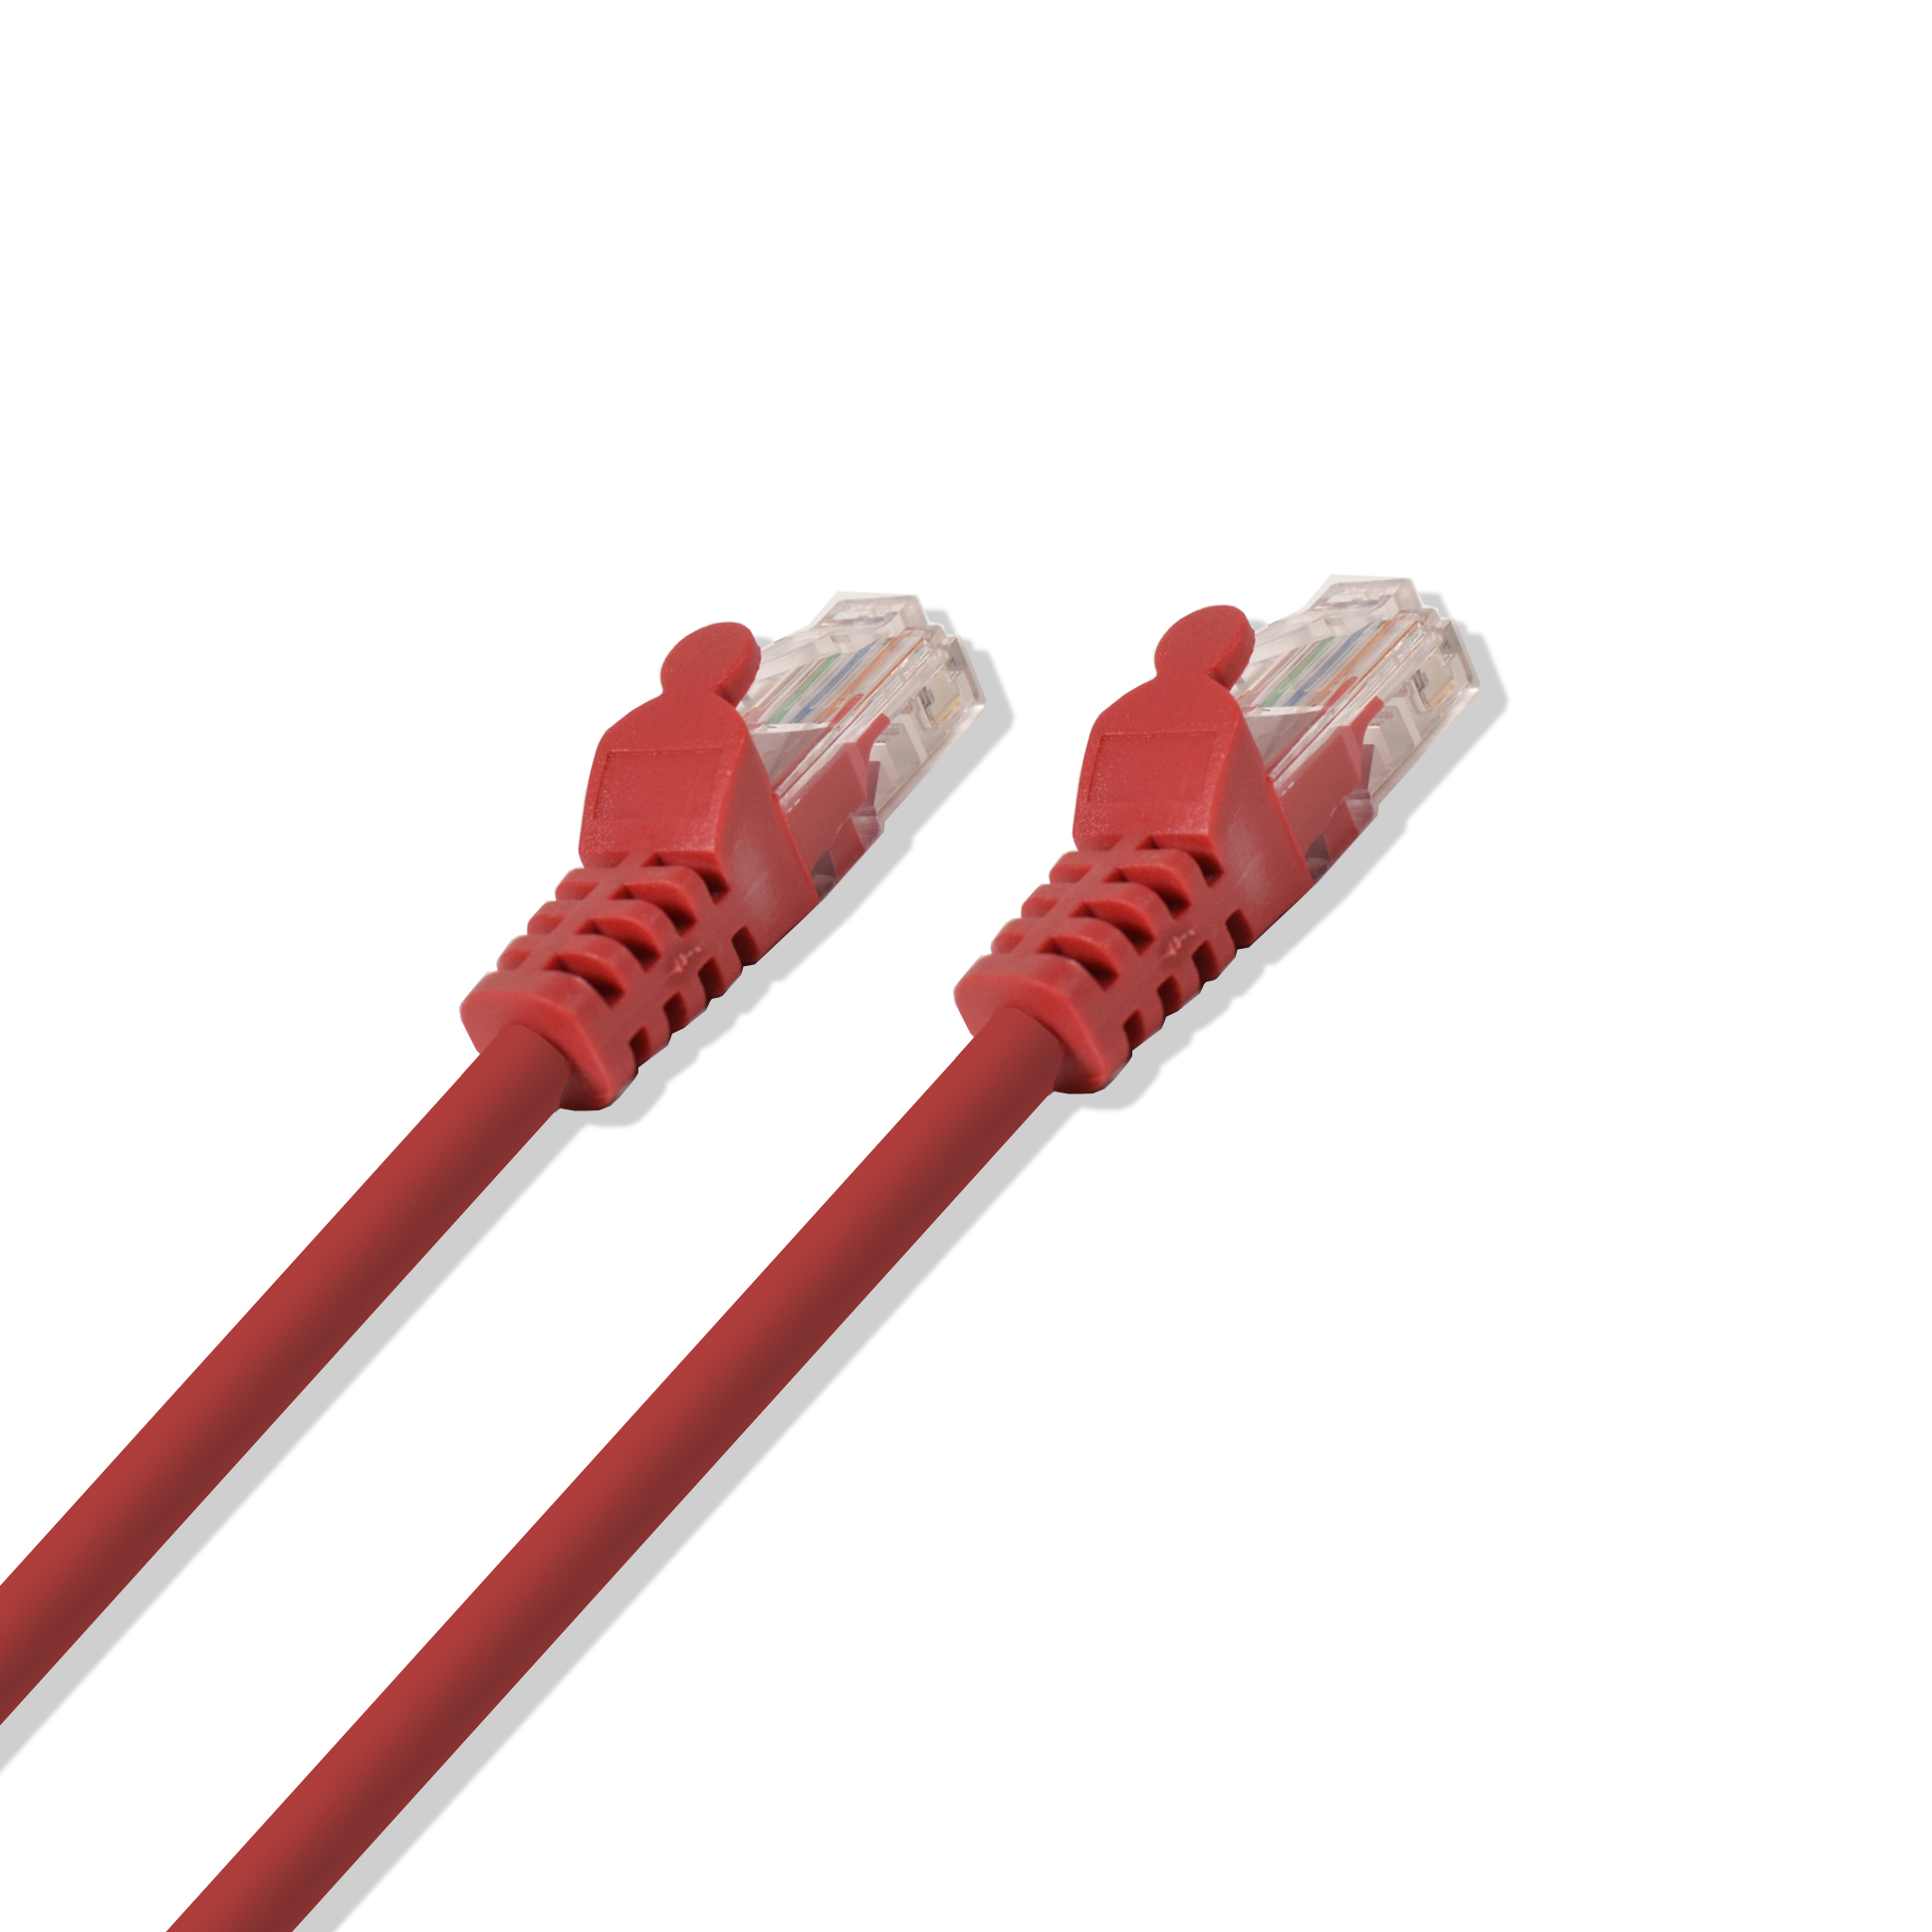 Cable red INTERNET - 20 Metros Rj45 Cat 5 Patch Cord Ethernet - Skynet Games